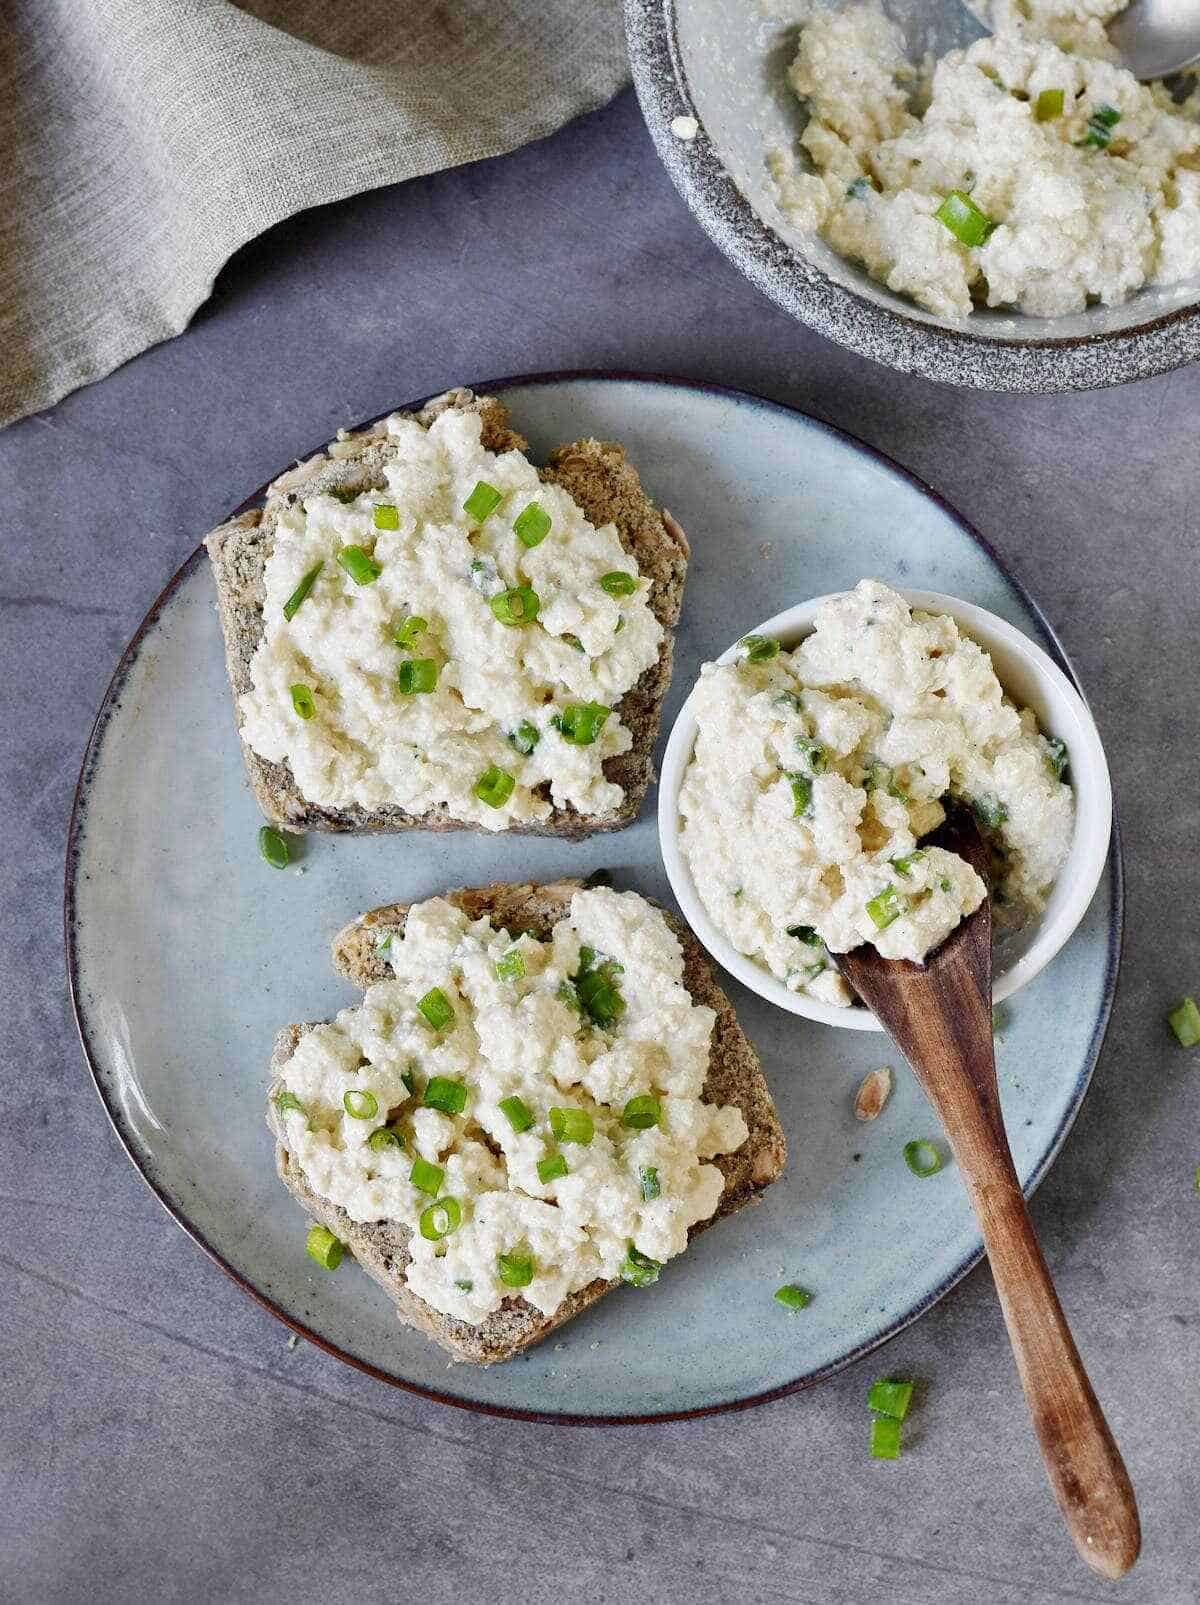 Two slices of bread covered with vegan cottage cheese and chives, as well as a small white bowl filled with cottage cheese and a wooden spoon on a gray stone circular plate on a gray countertop accented with a gray cloth napkin.